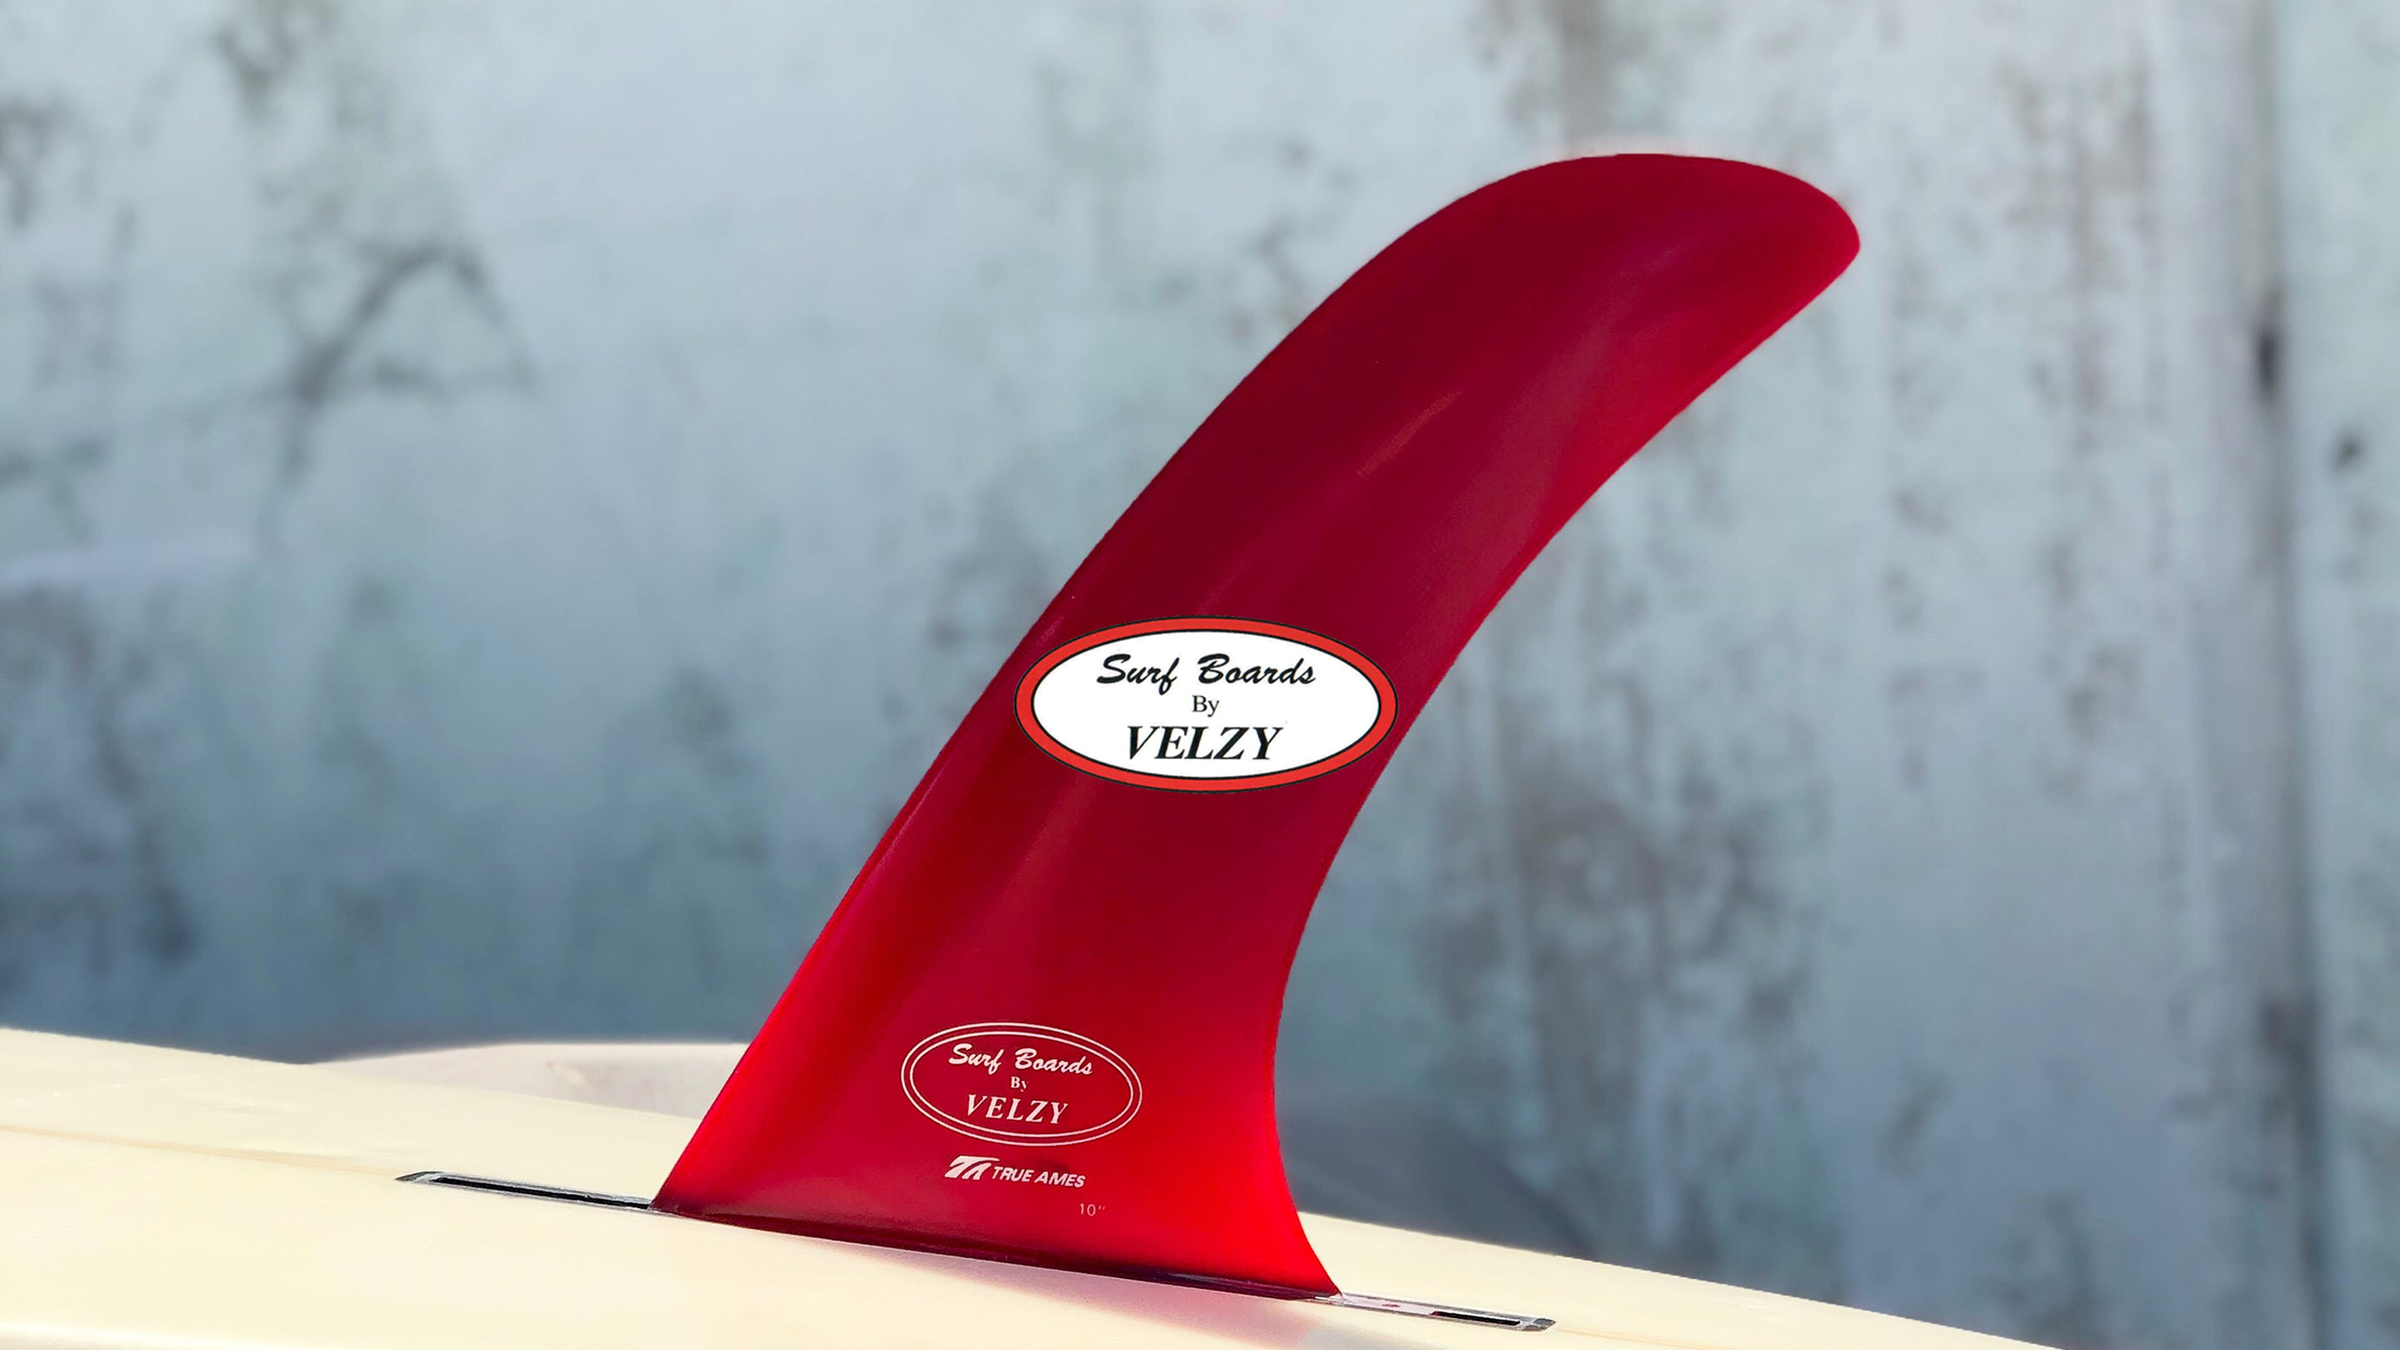 Surfboards By Velzy